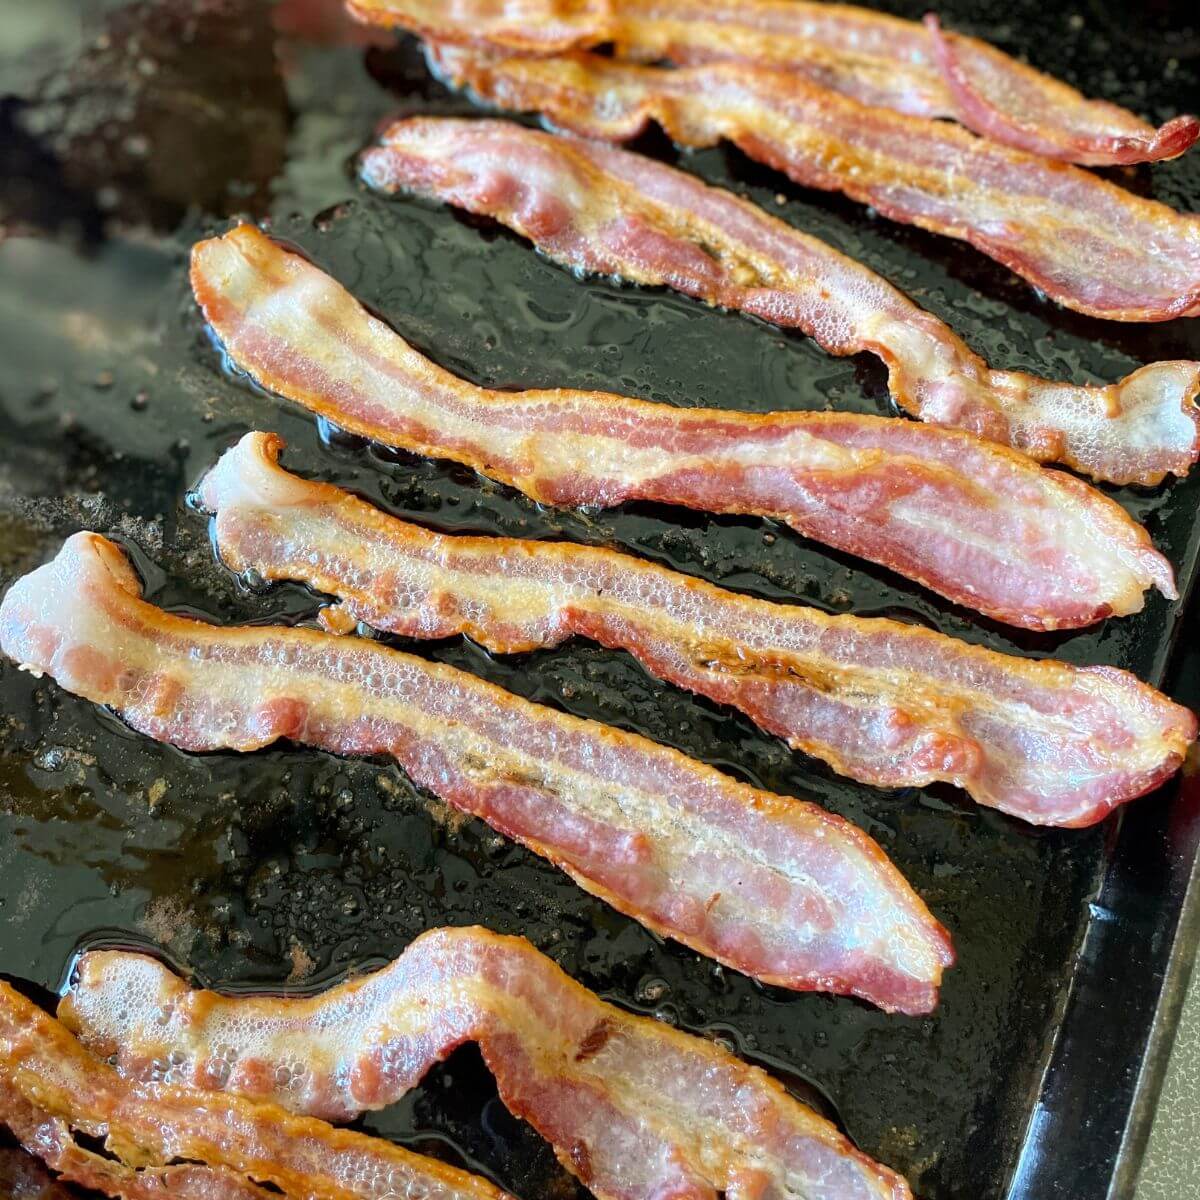 I've Been Making Bacon Wrong. Here's the Best (and Cleanest) Way